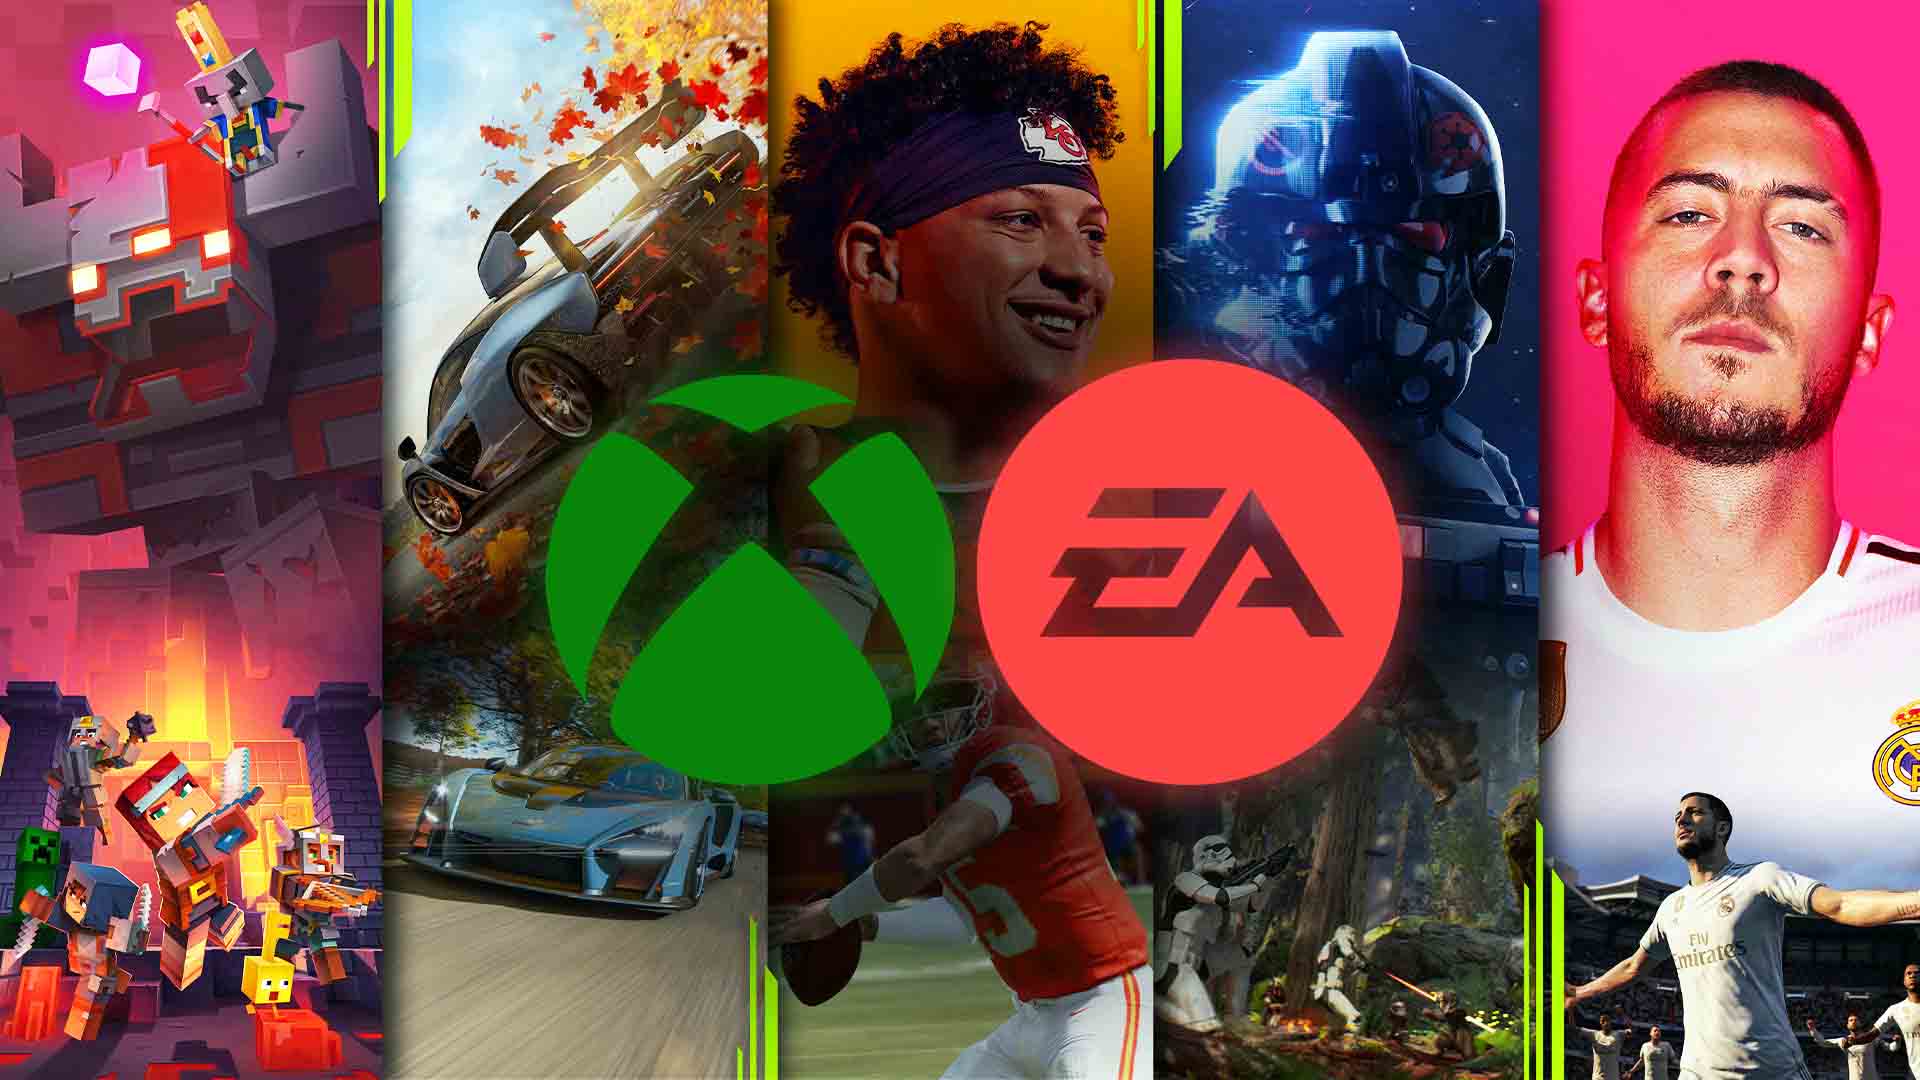 get ea play with xbox game pass